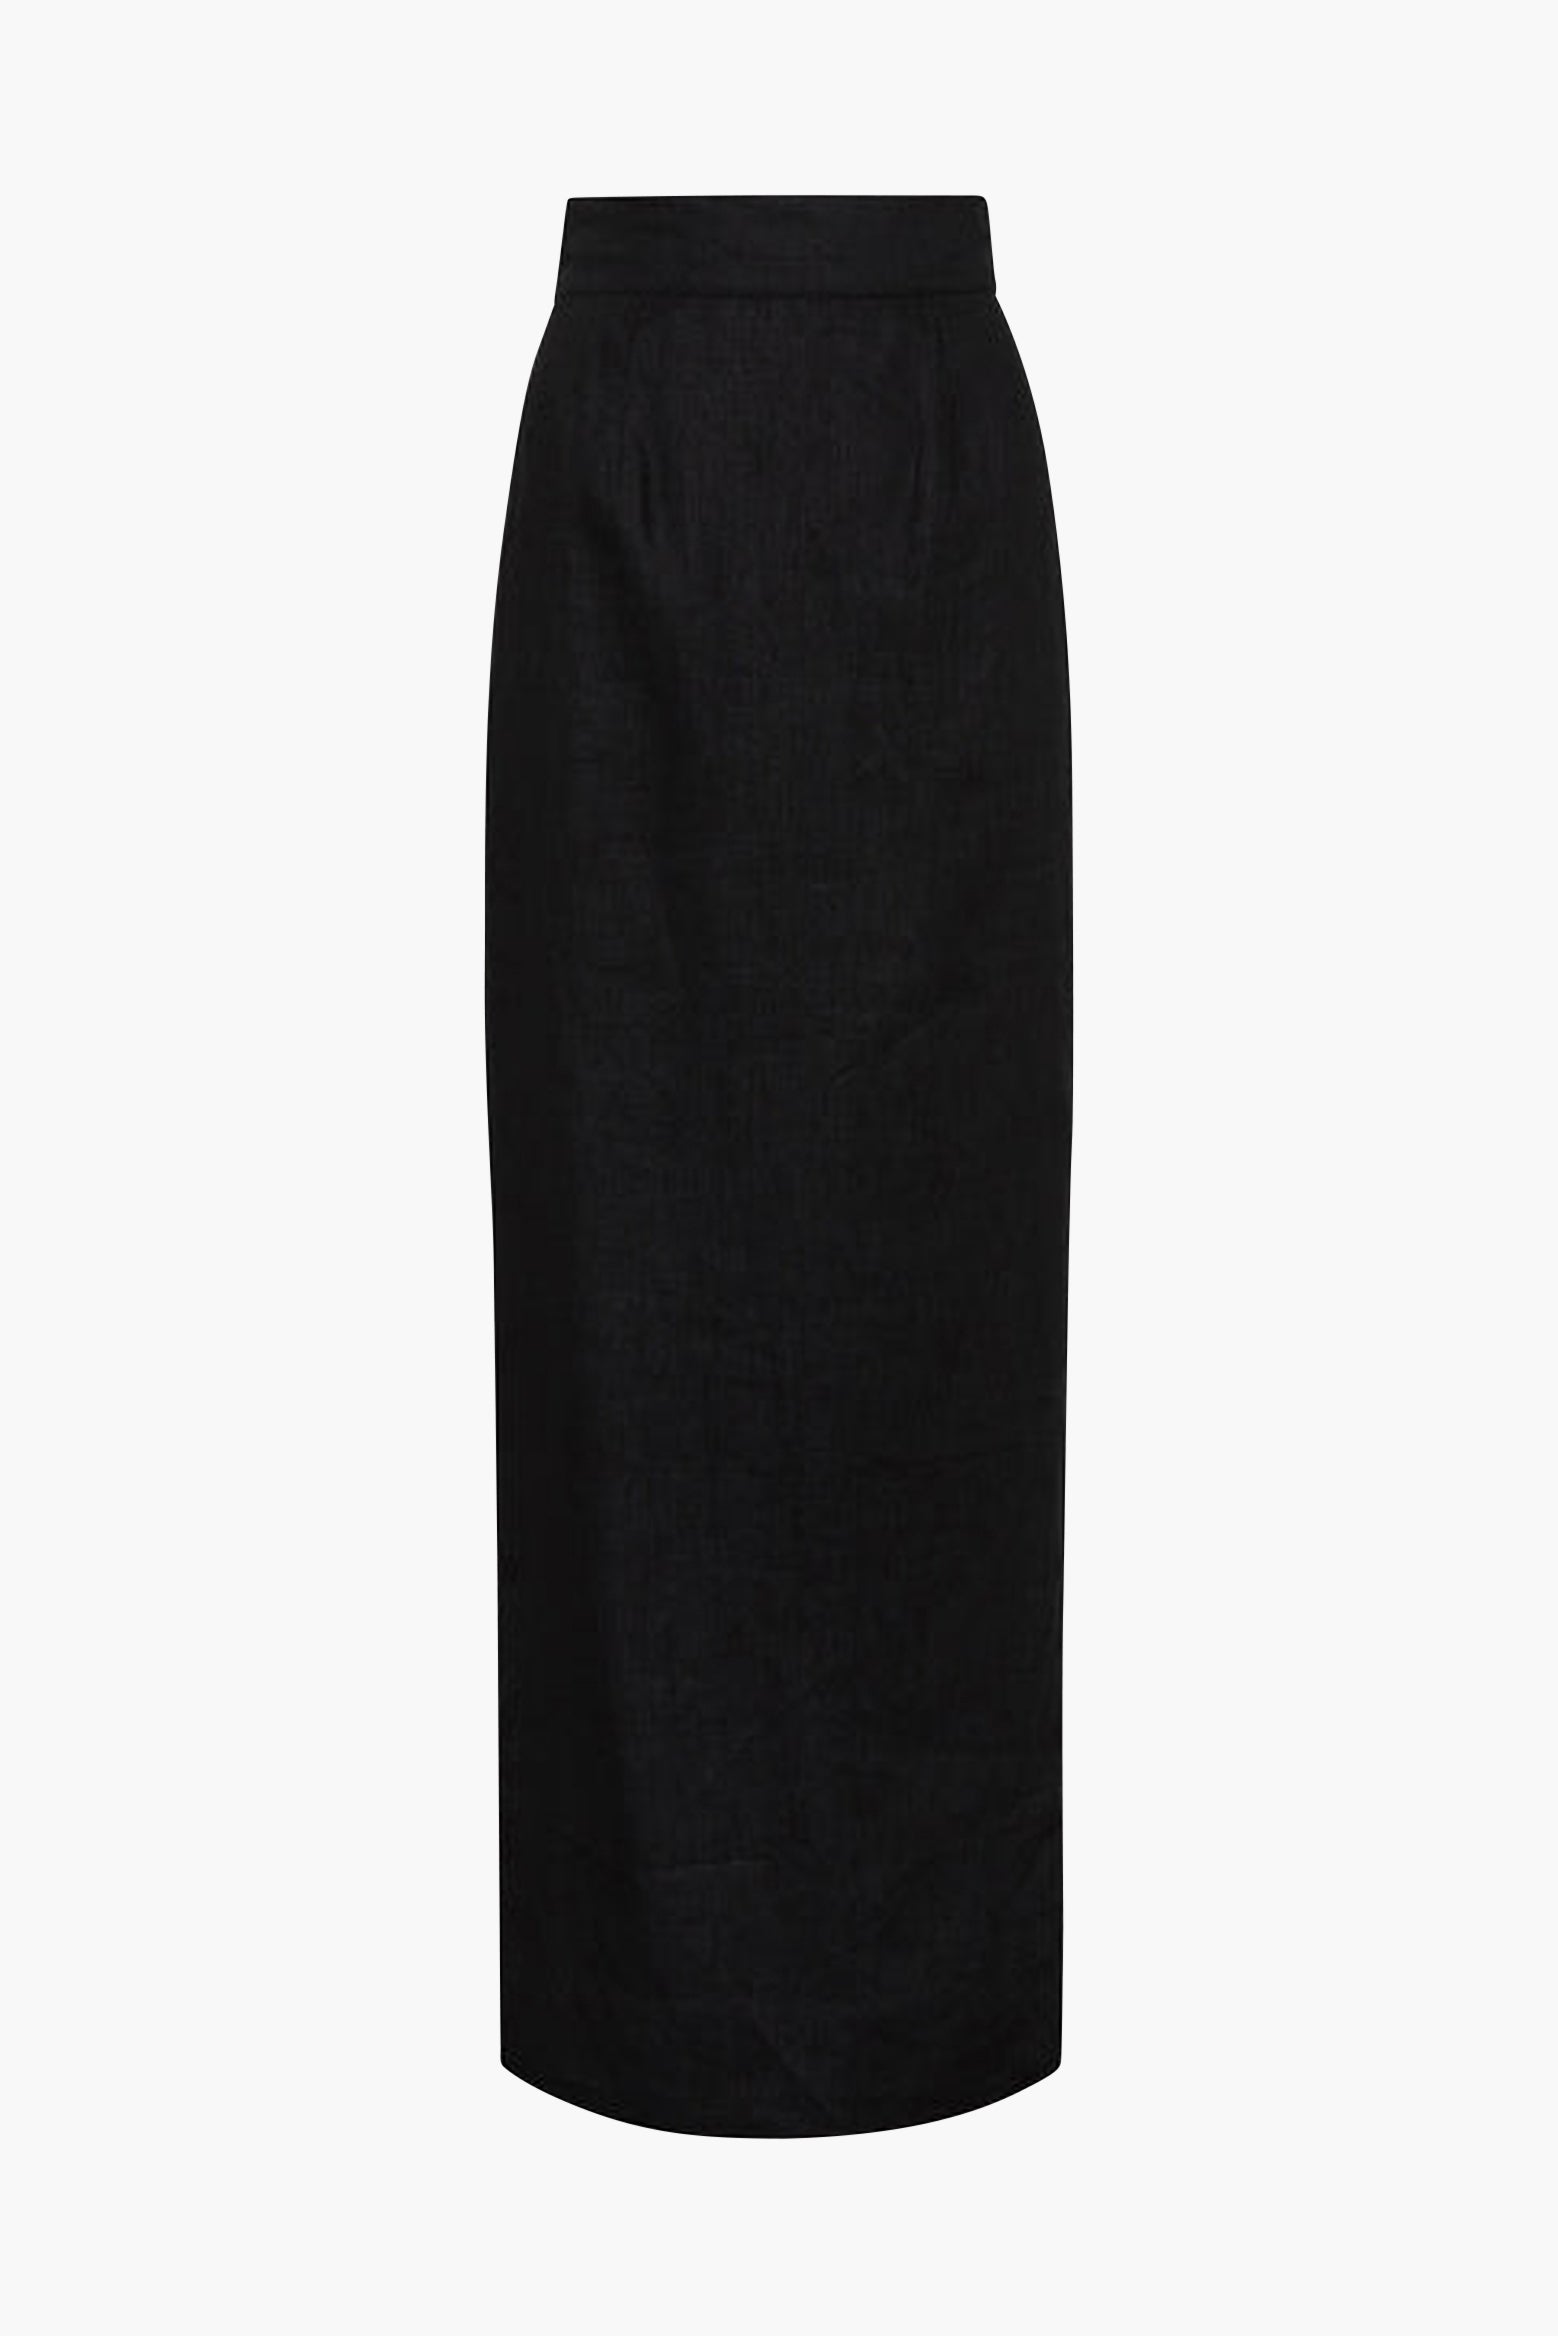 Posse Emma Pencil Skirt in Black available at TNT The New Trend Australia